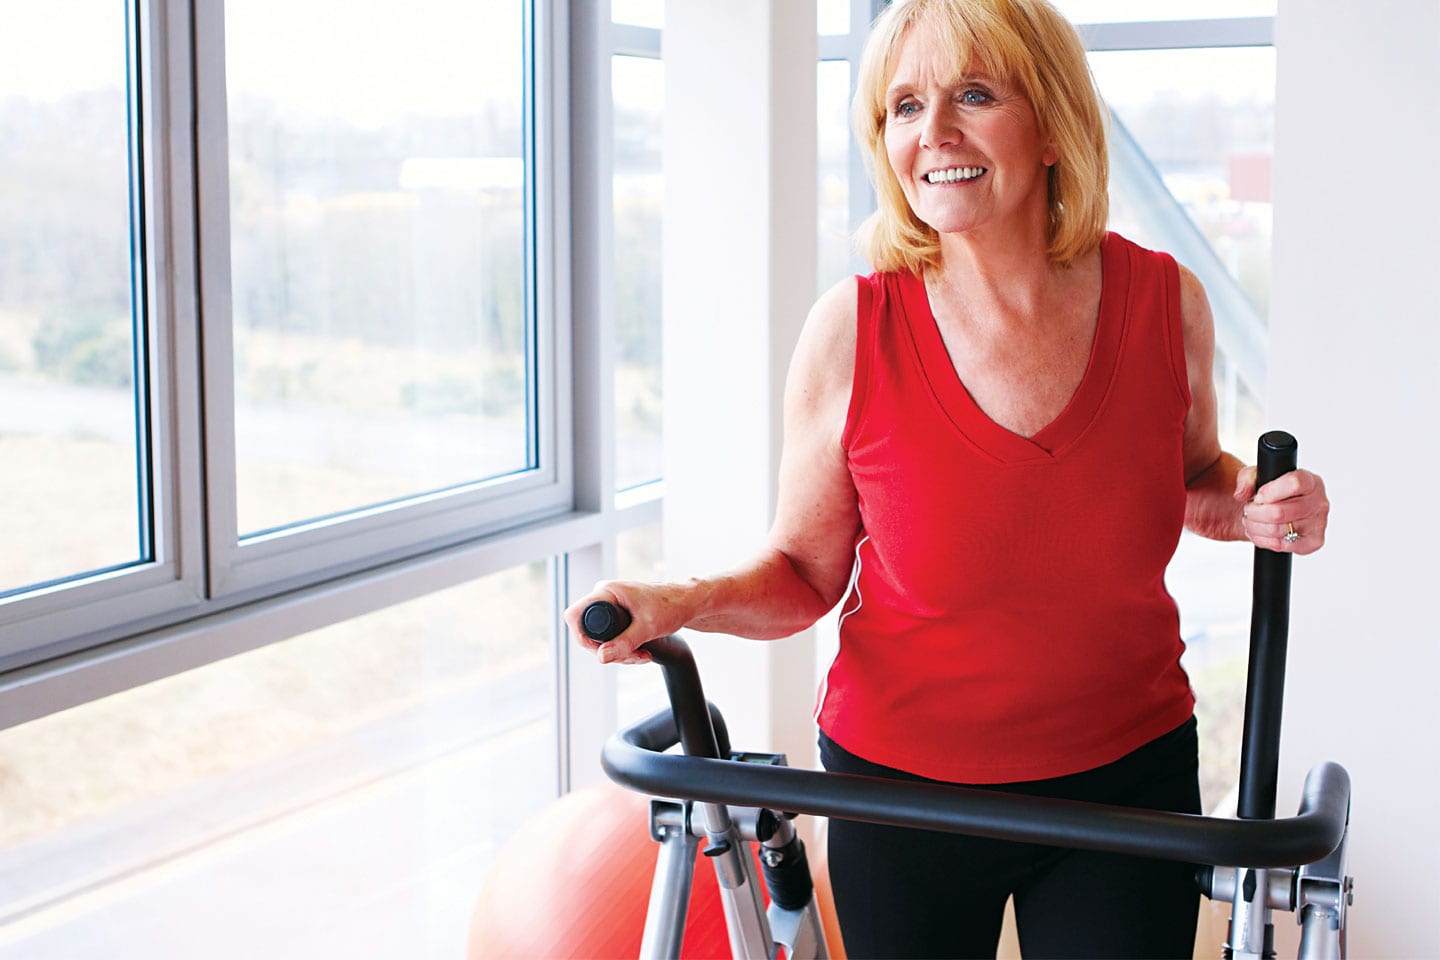 Woman working out on exercise machine